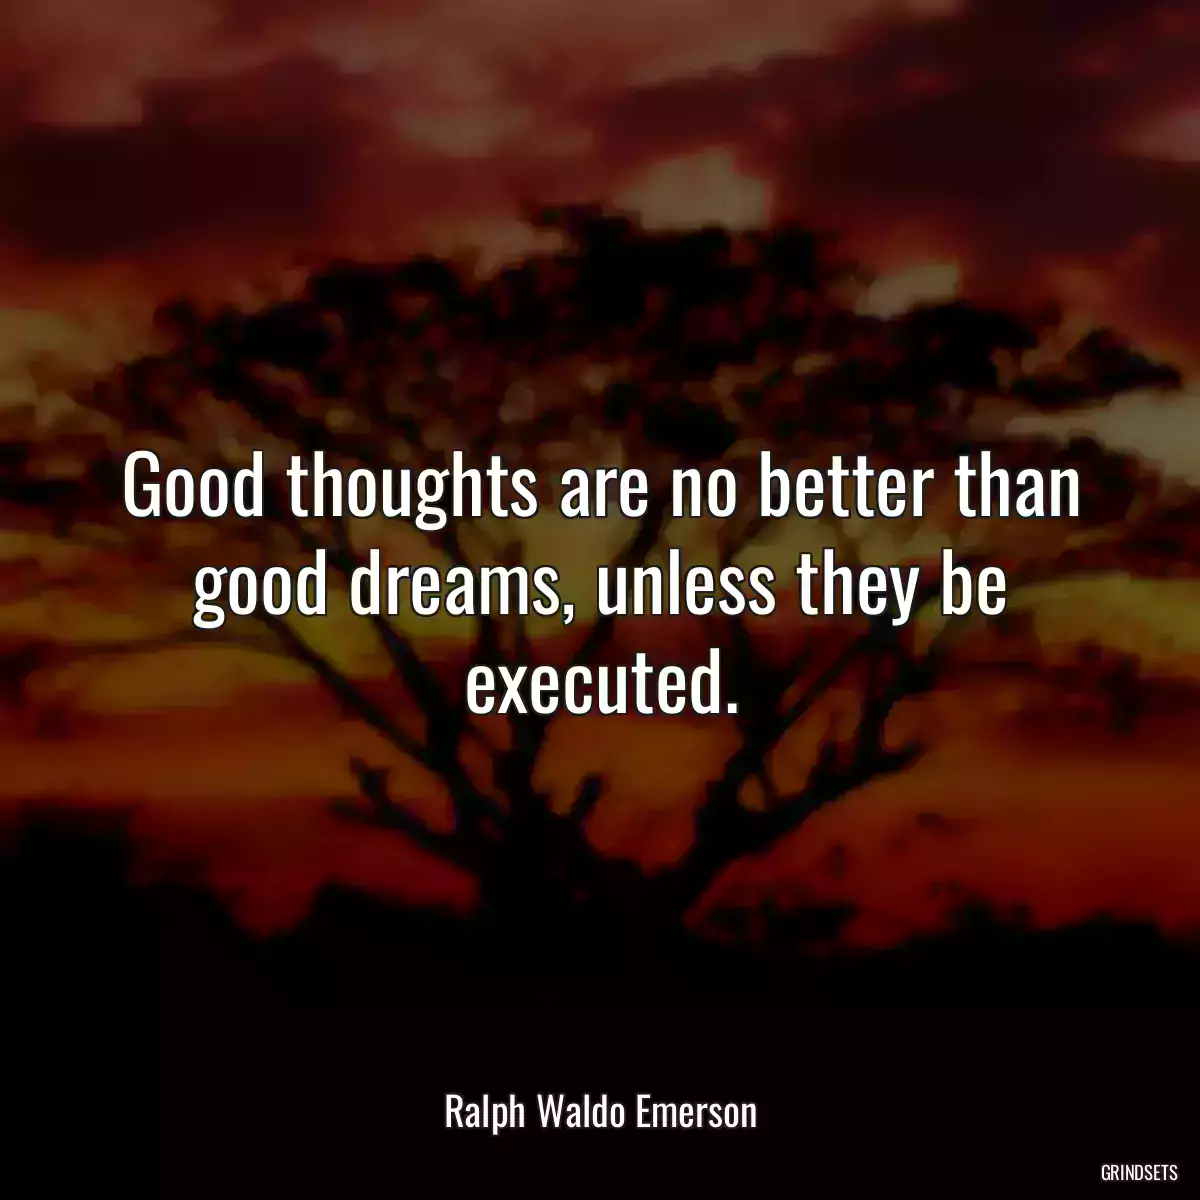 Good thoughts are no better than good dreams, unless they be executed.